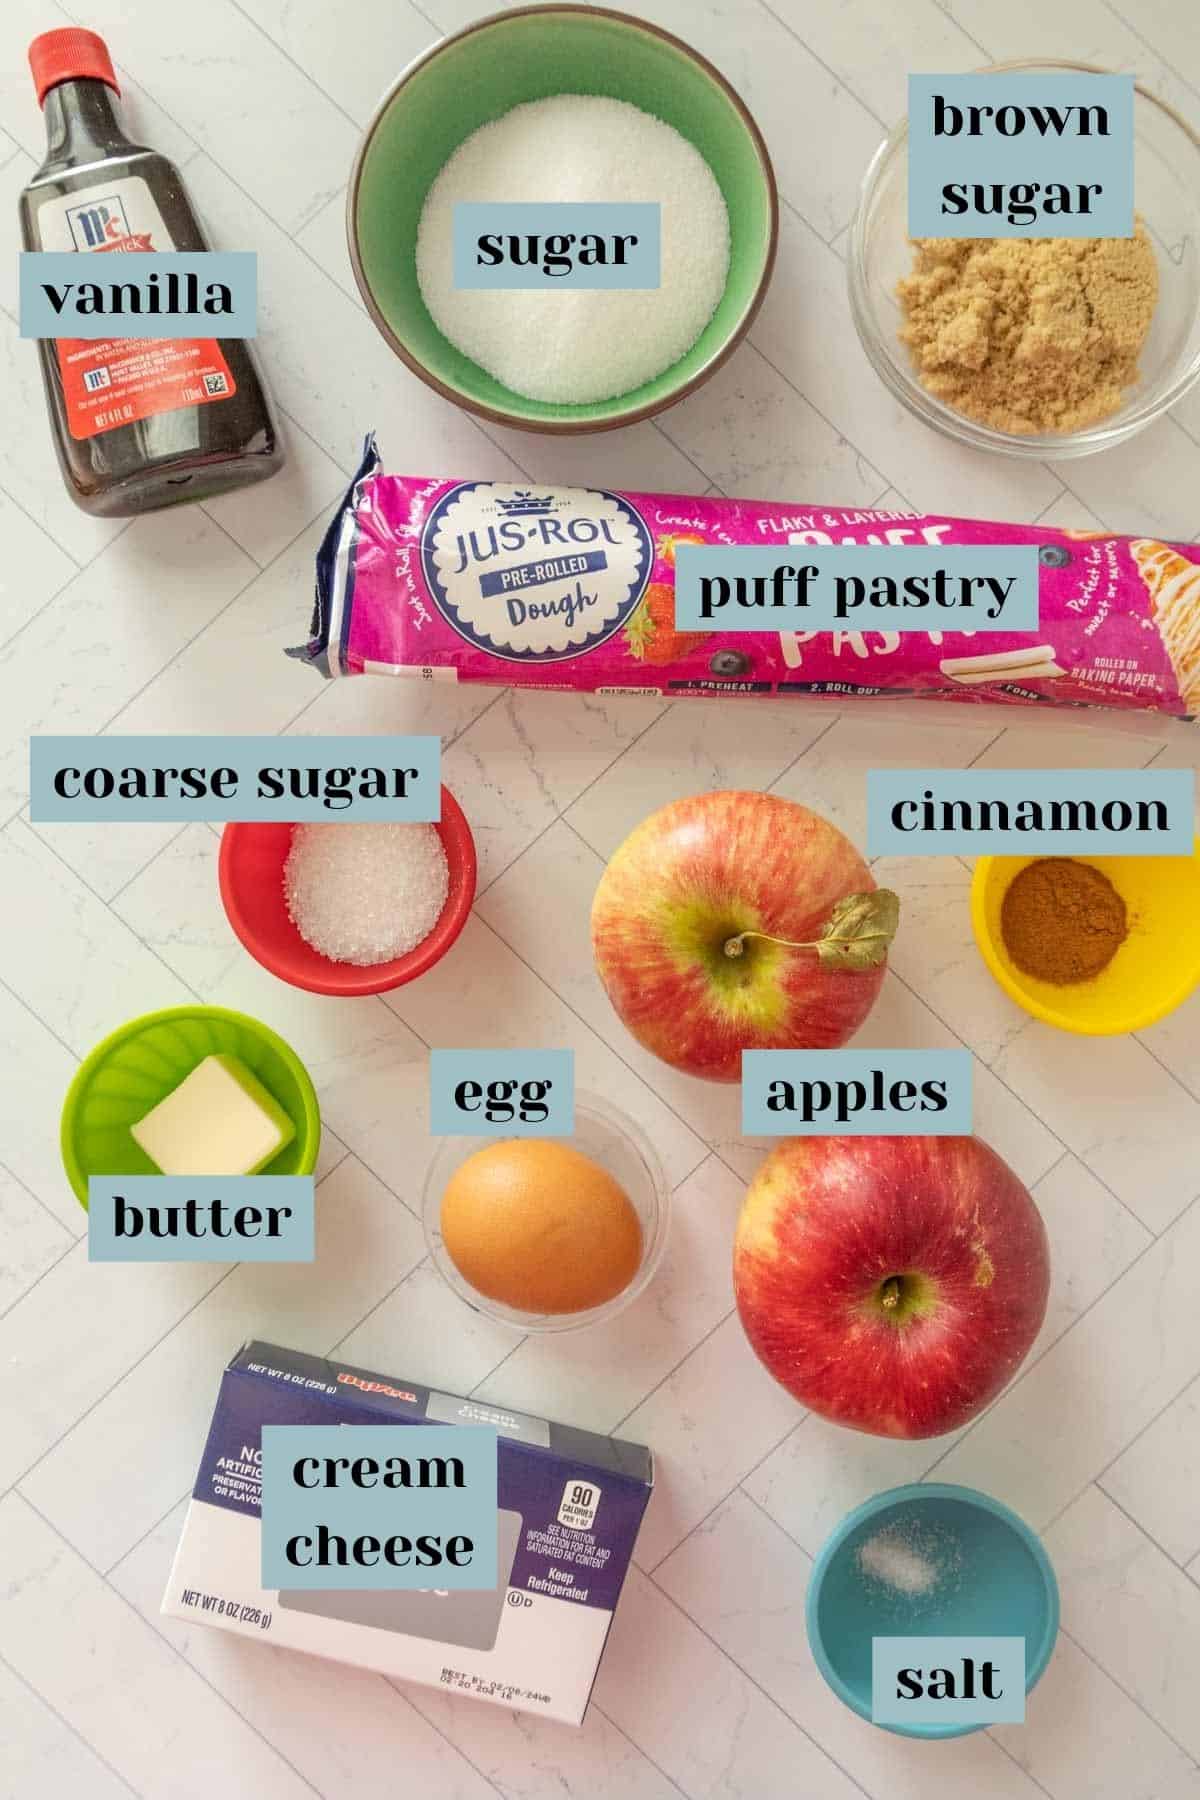 The ingredients for an apple danish.